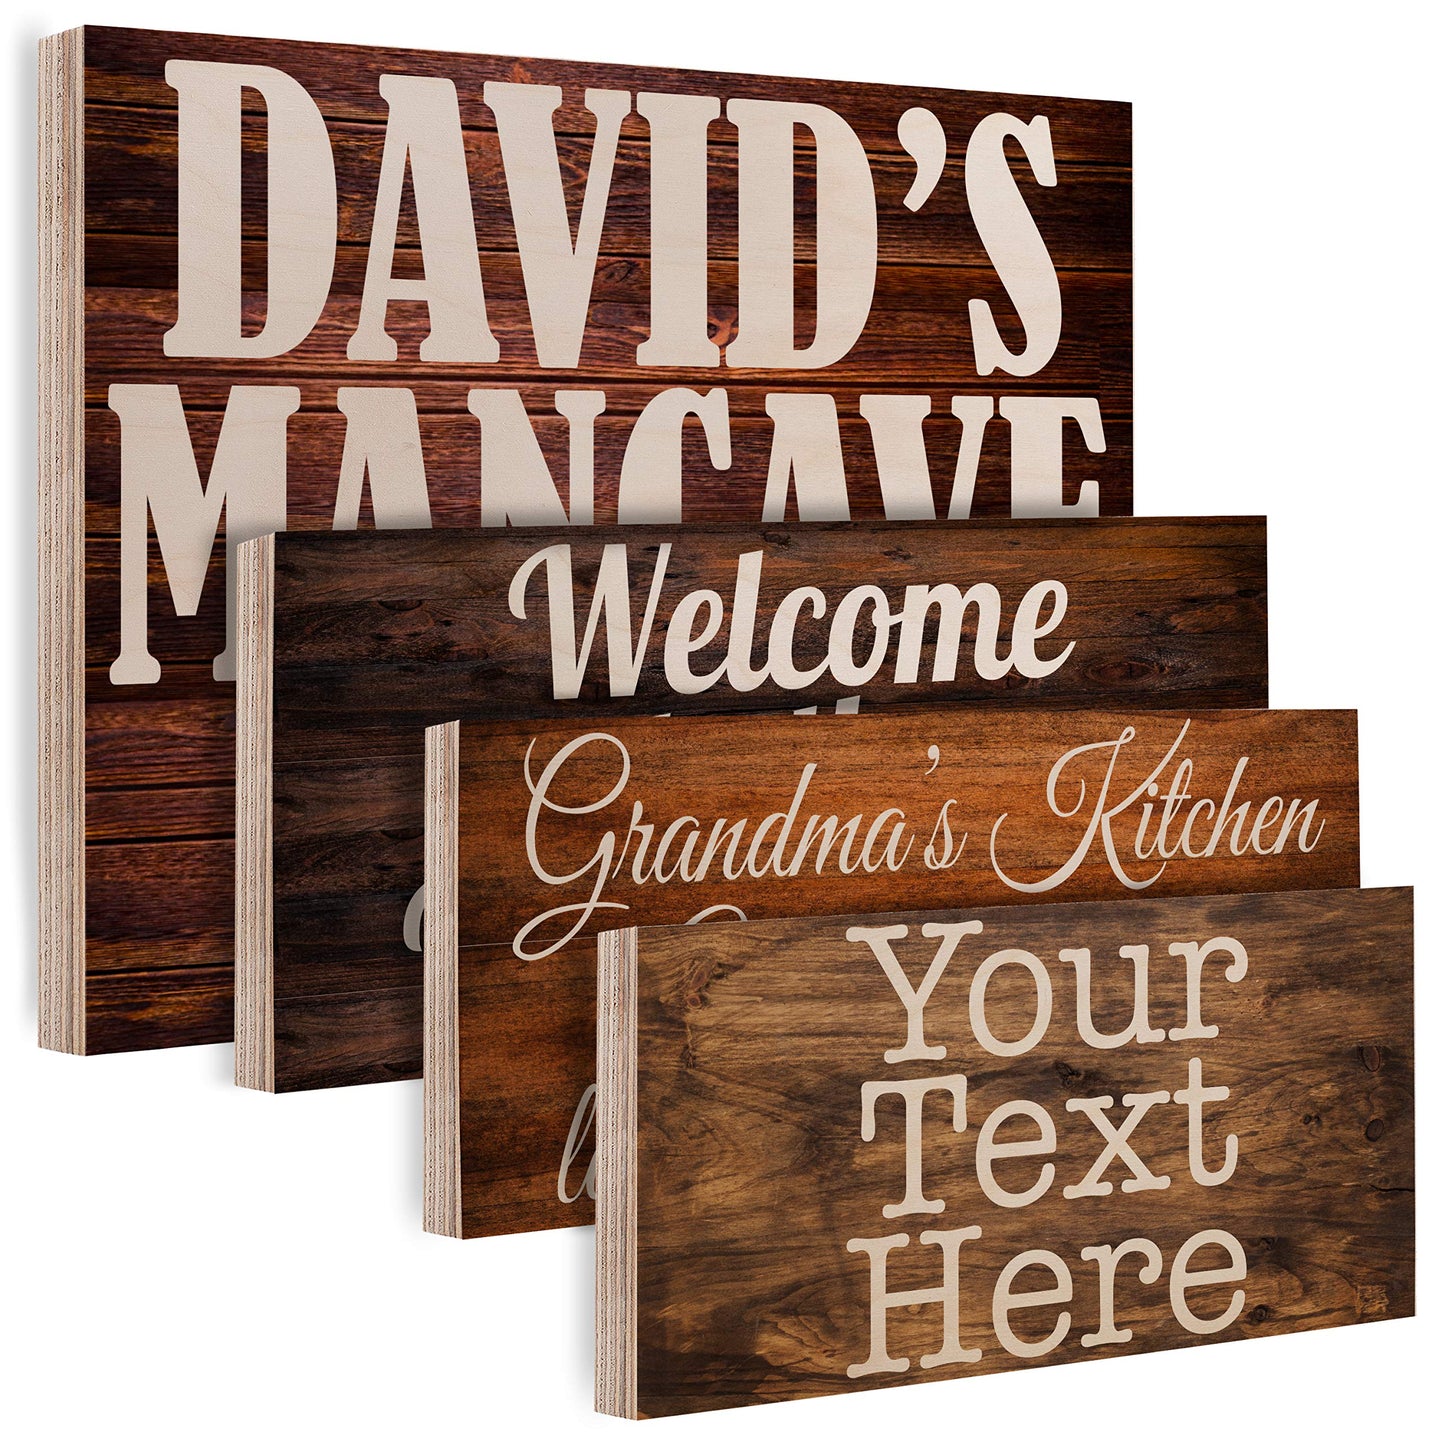 Personalized Wood Signs for Gift - Customized Wooden Board, Plank Decoration Gifts - Custom Family Wood Sign, Name Date - Home Kitchen, Wall Art